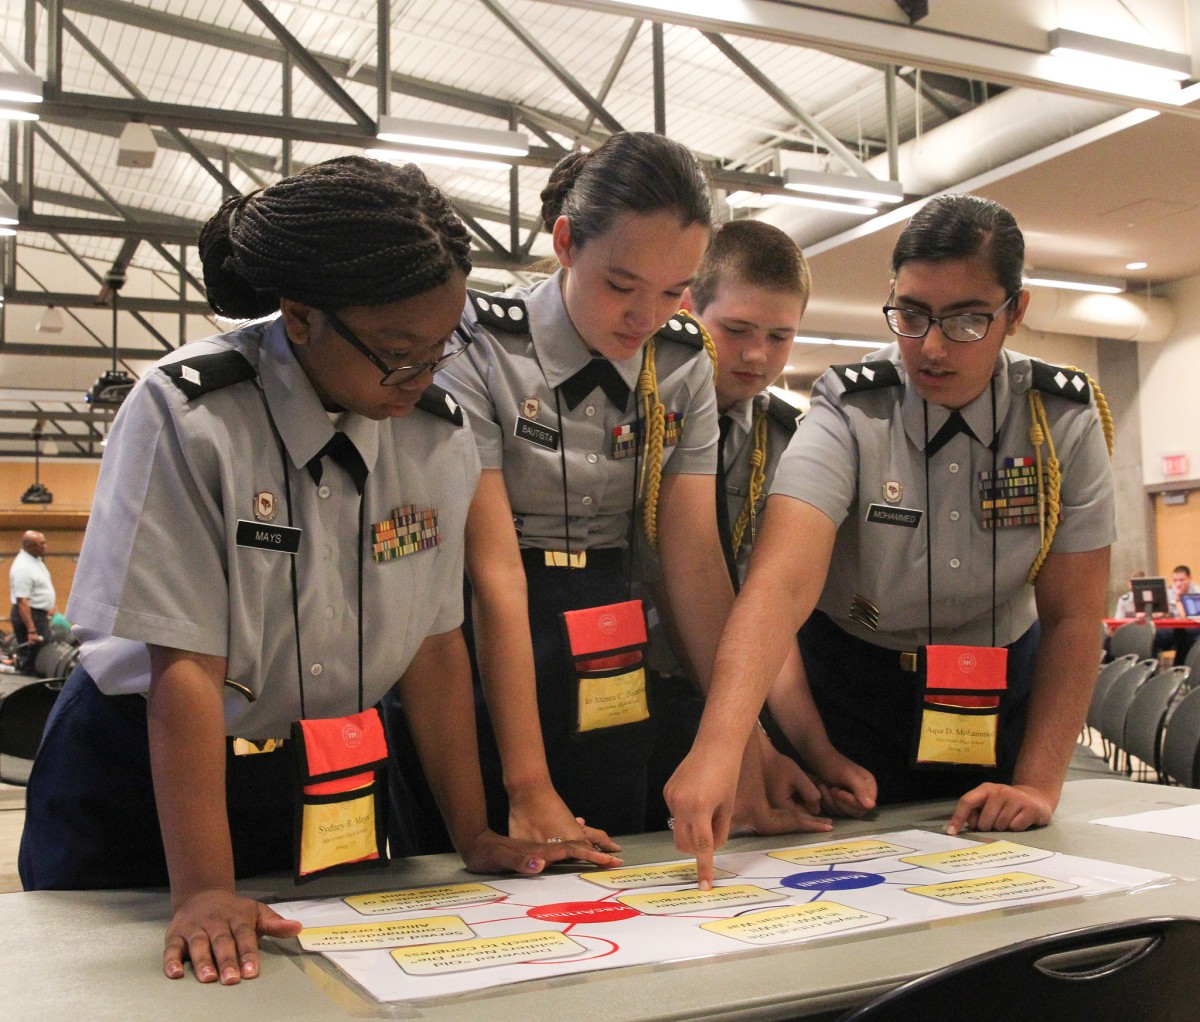 JROTC Program And Academic Bowl Face Of Army For Youth Article The United States Army